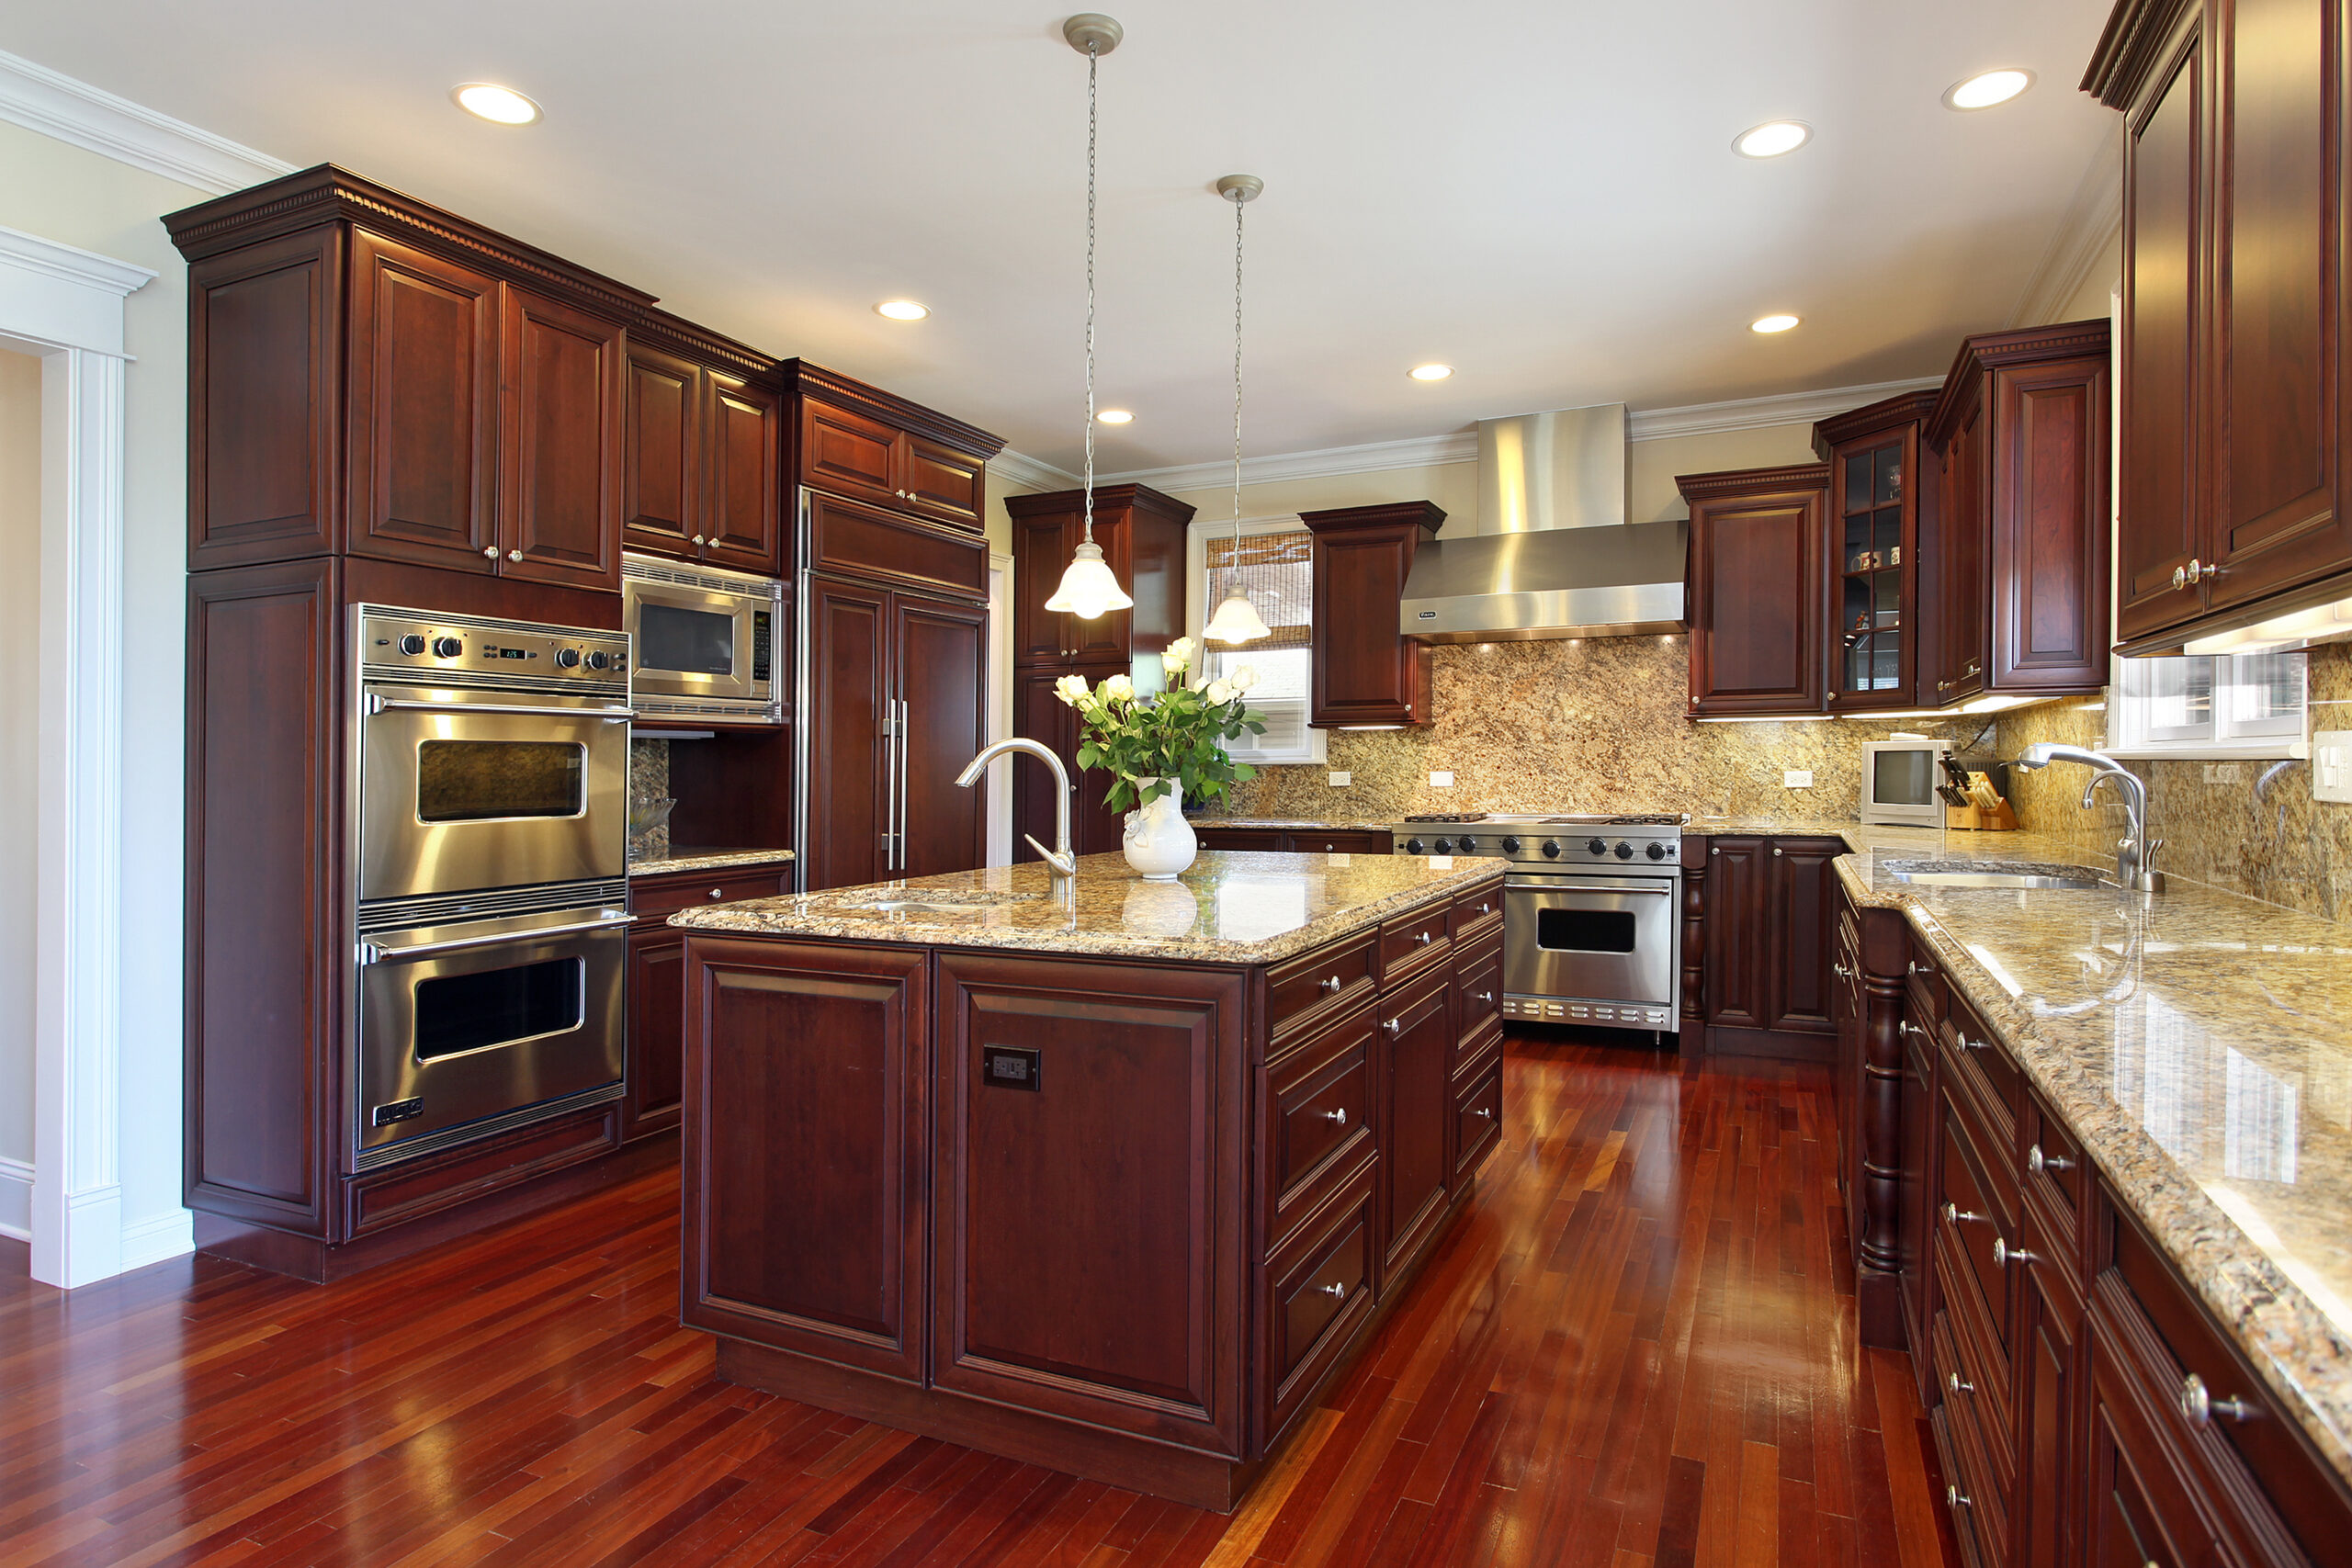 Kitchen in luxury home with cherry wood cabinetry